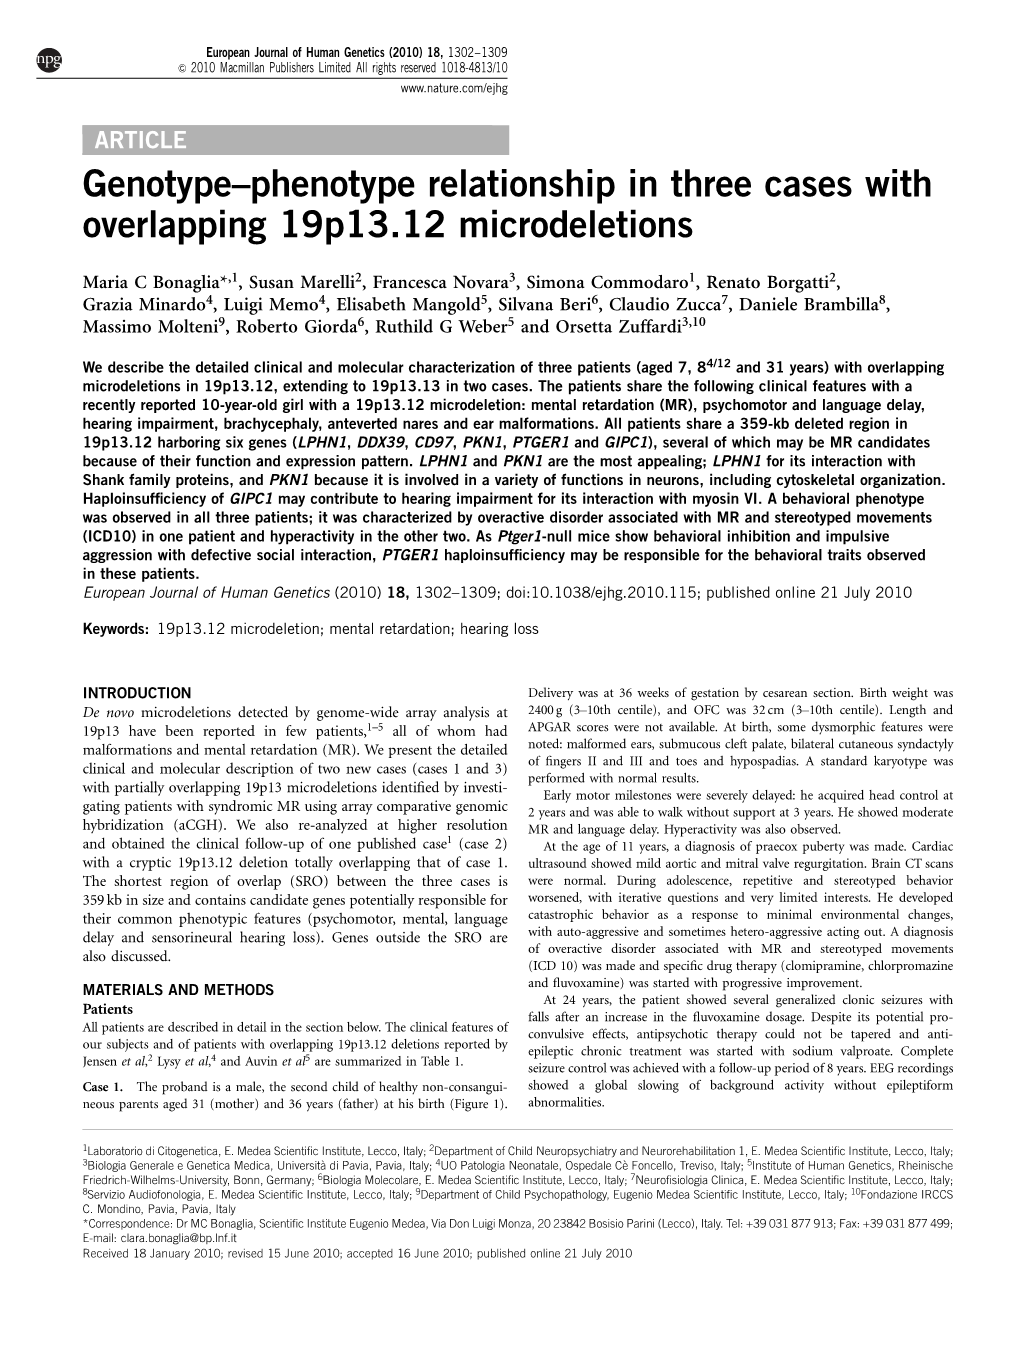 Phenotype Relationship in Three Cases with Overlapping 19P13.12 Microdeletions